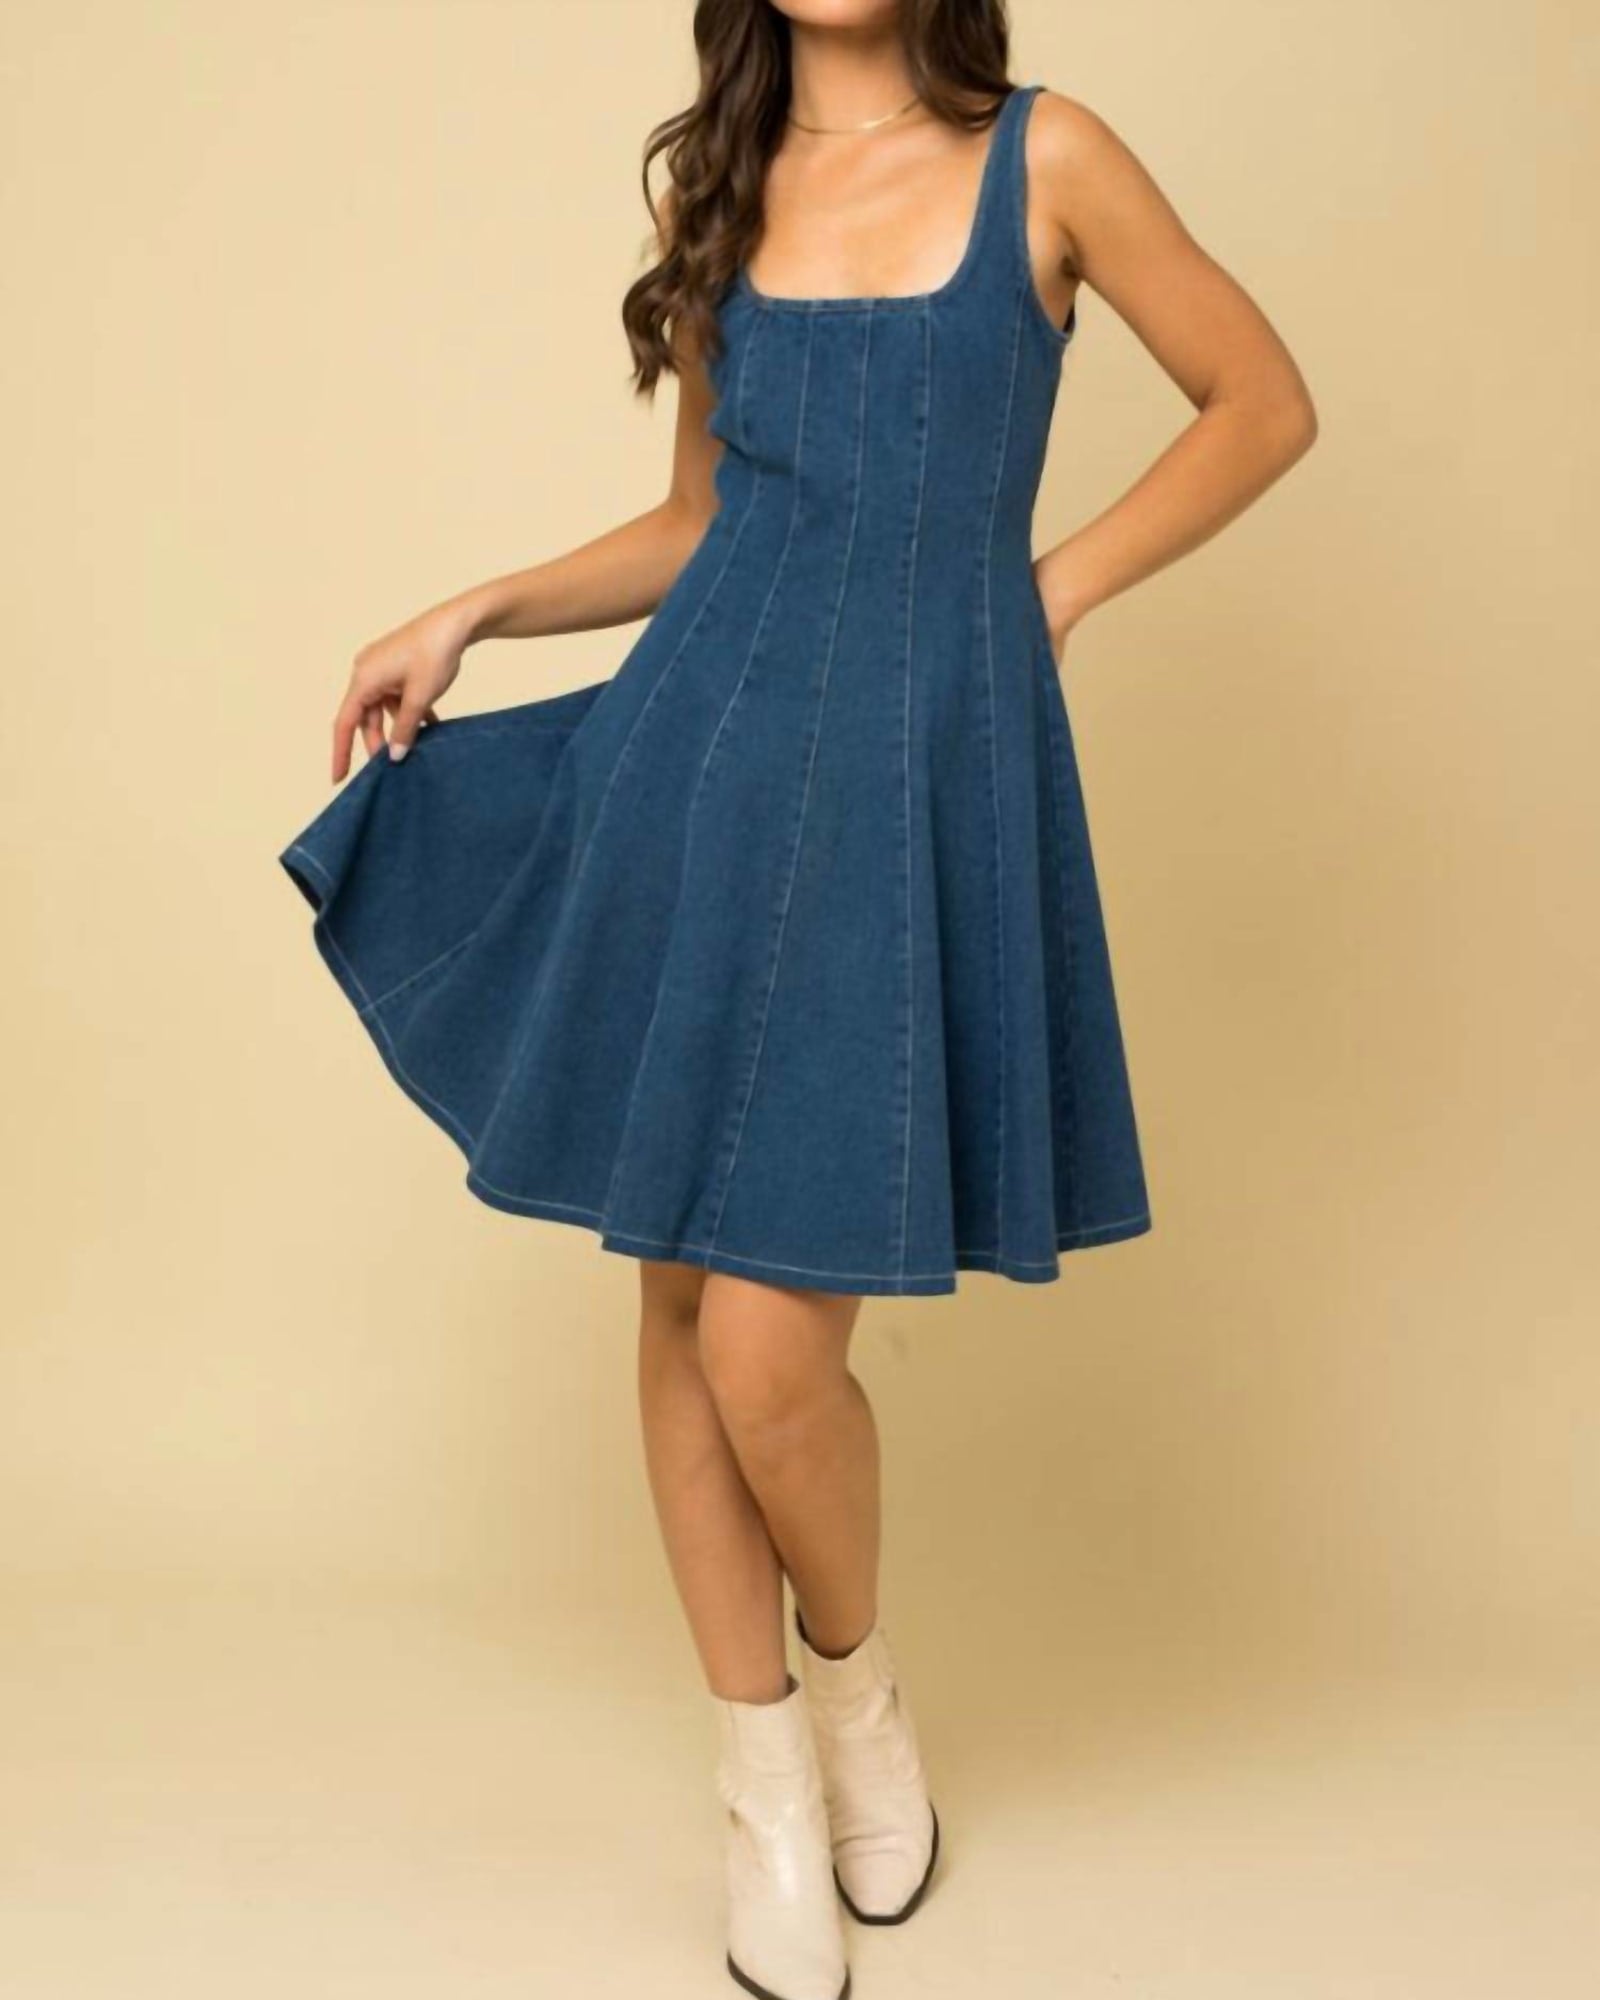 Women's Secret Garden Sleeveless Dress - Gabby fabric - Wrinkle resistant;  No need to iron or steam - Lightweight and perfect for the summer -  Sleeveless - Knee length - Flattering fit 